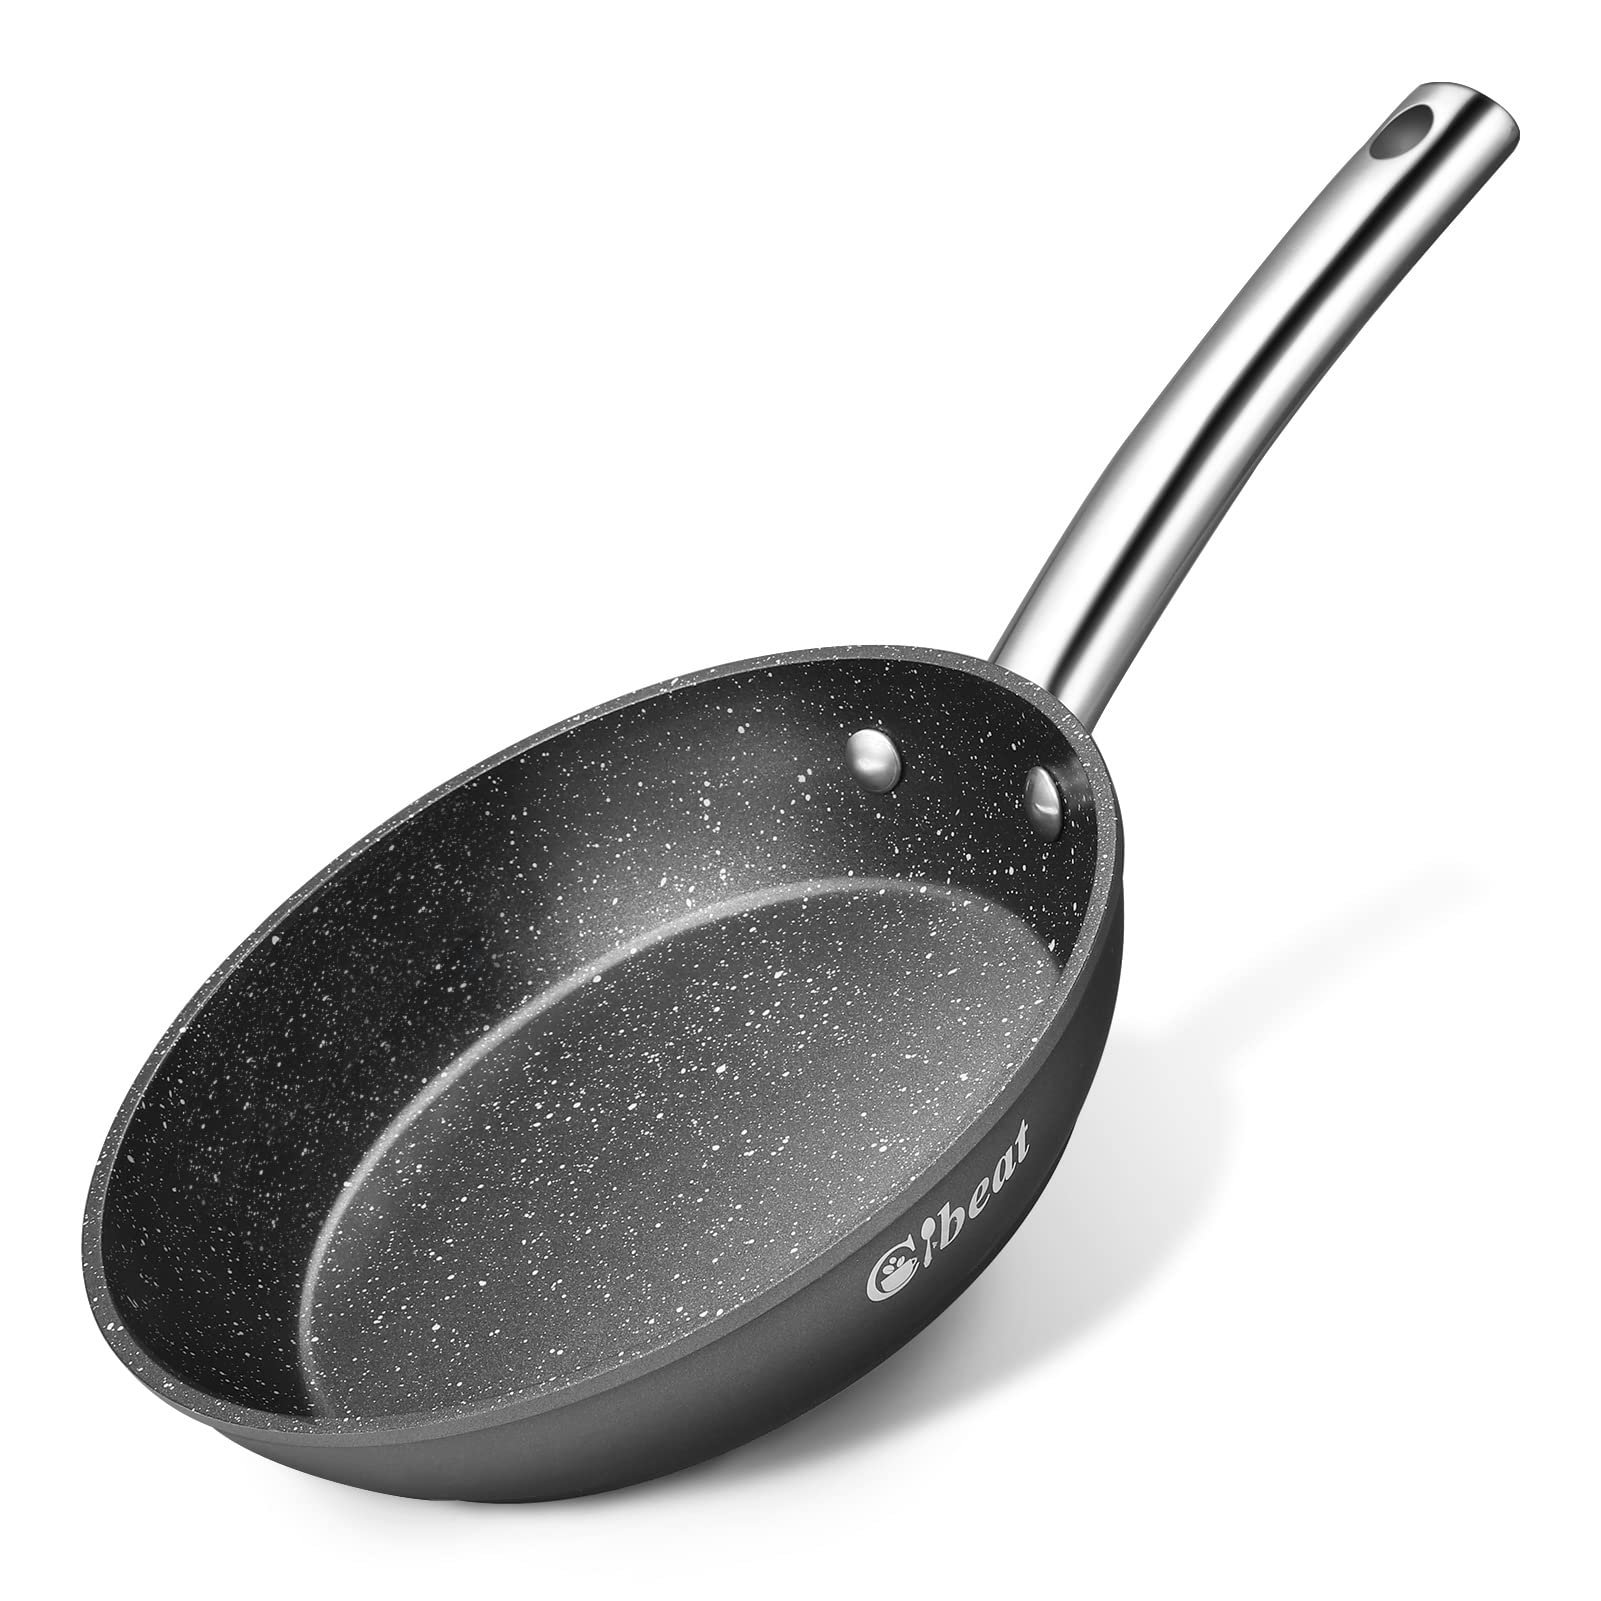 Cibeat Nonstick Frying Pan, Aluminum Skillet with Stainless Steel